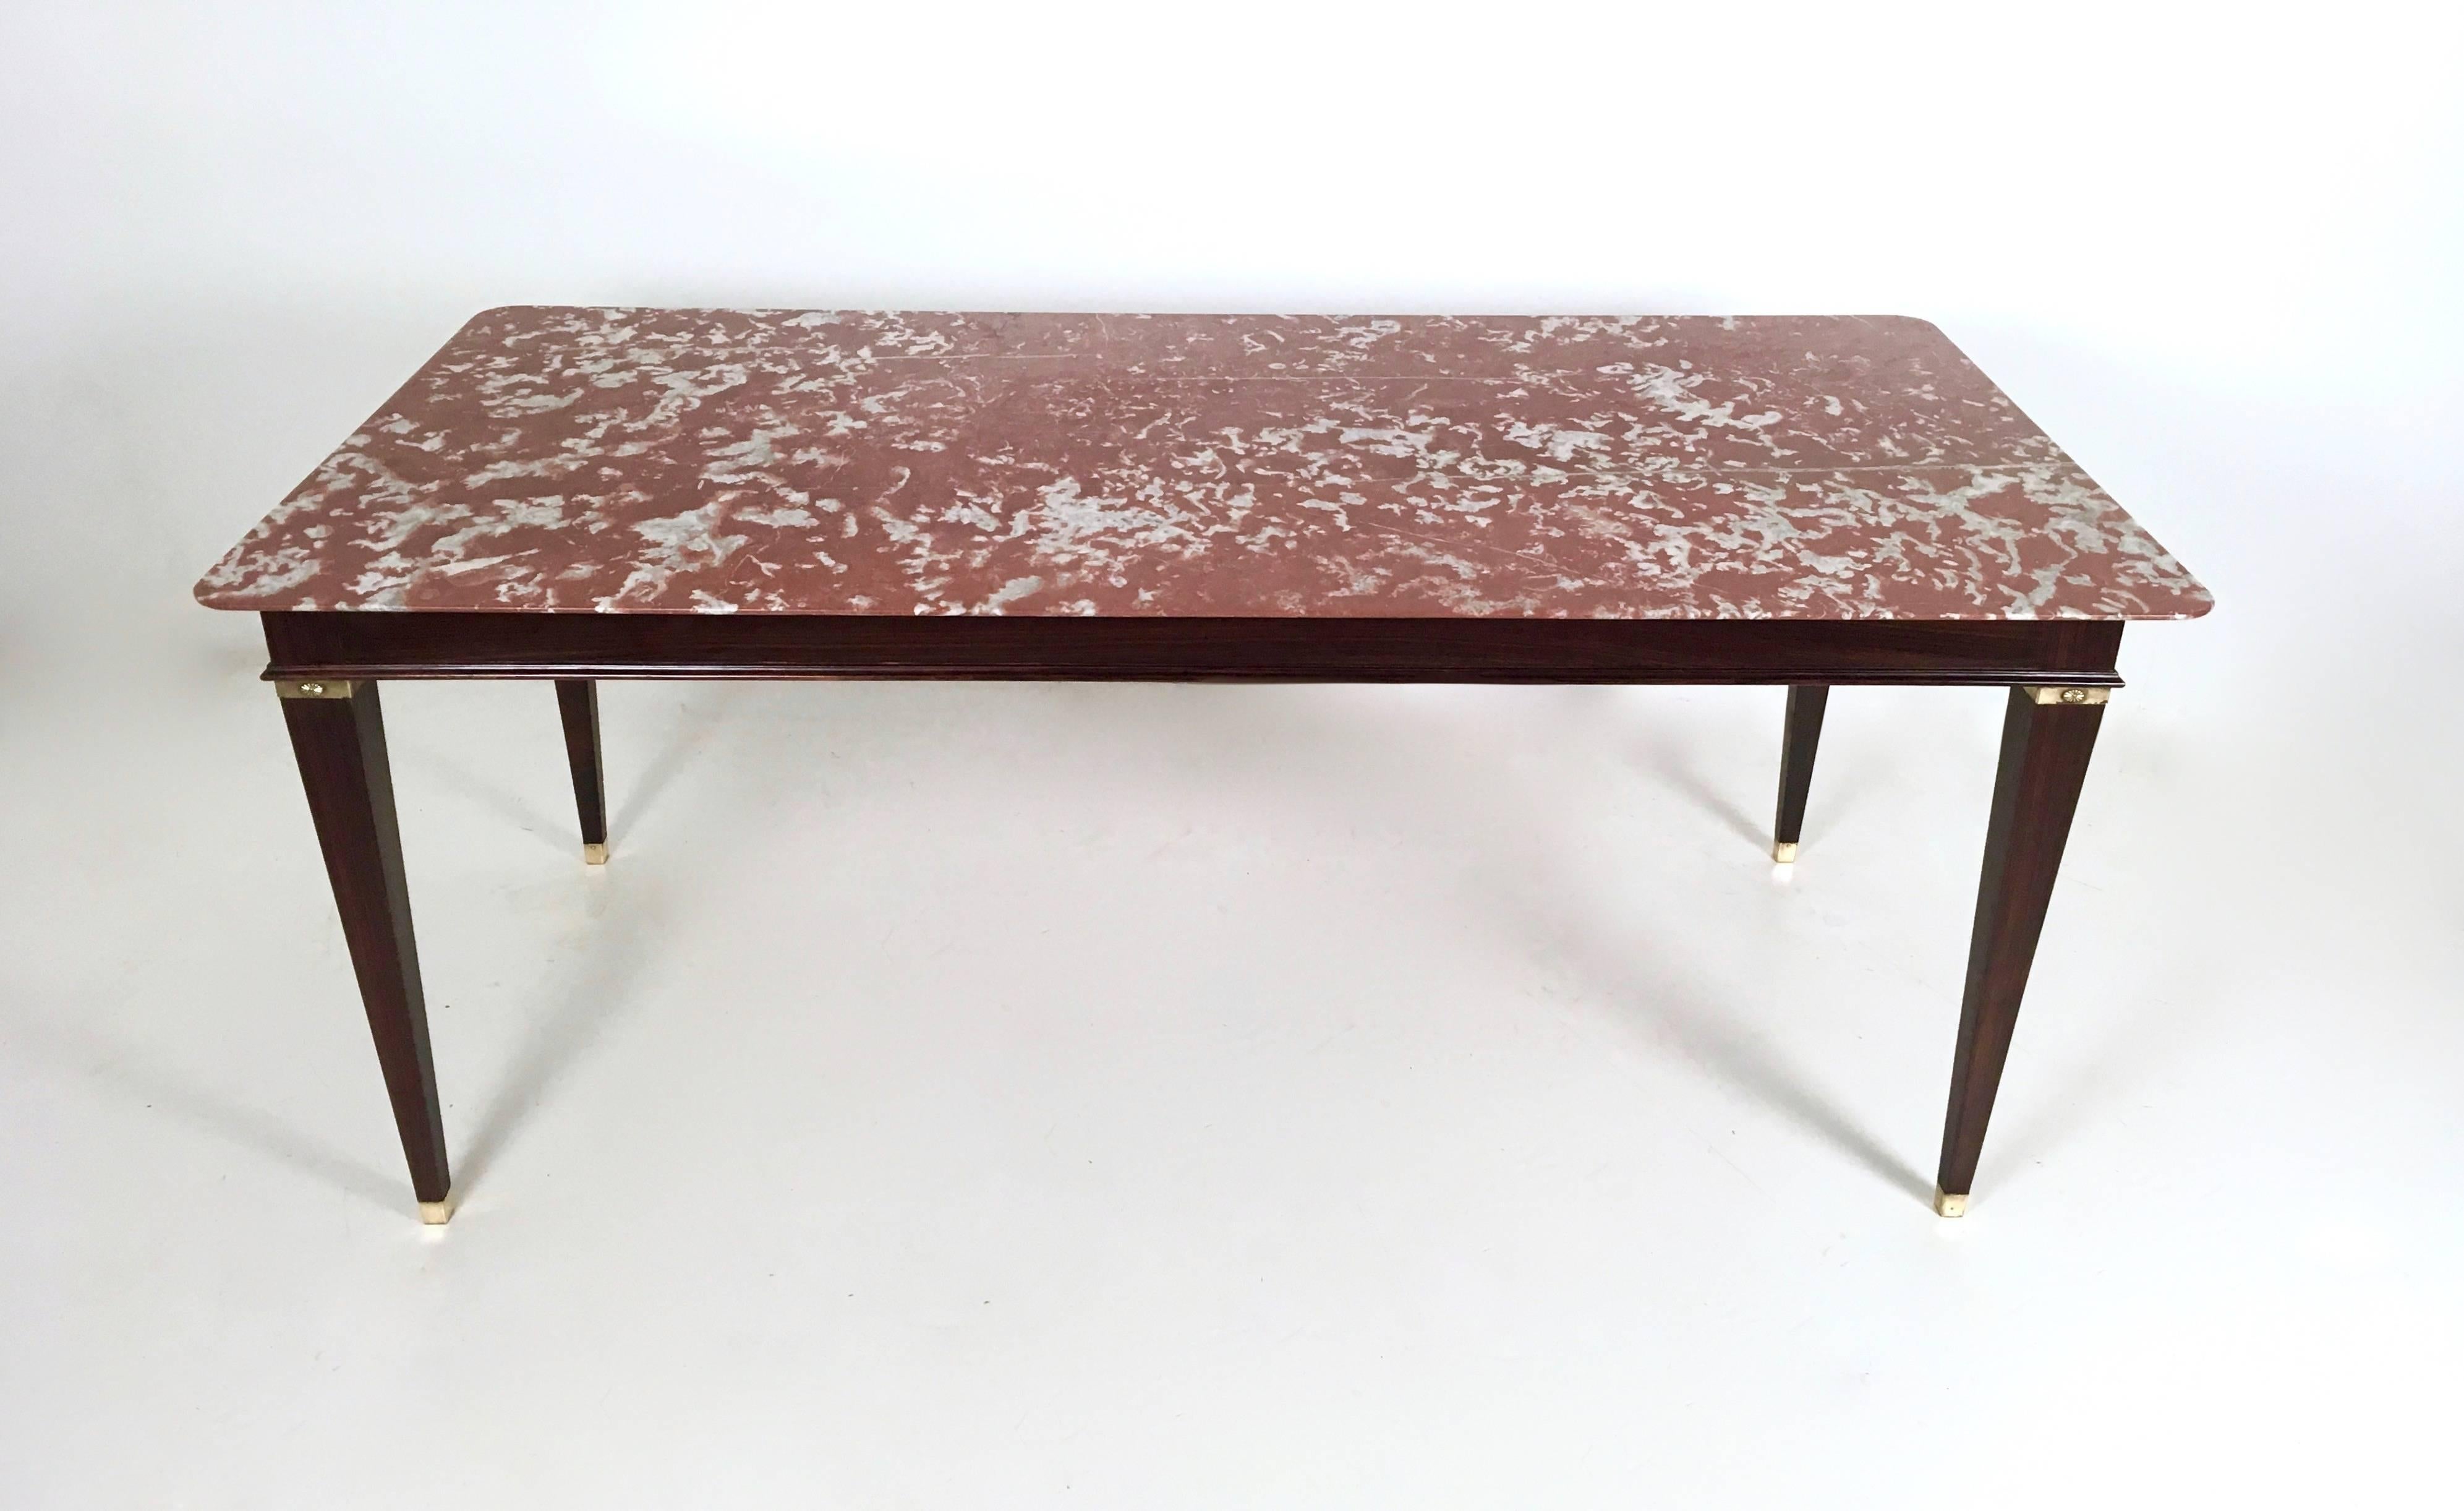 Made in wood, brass and red marble from France.
The wood has been polished with shellac and the marble-top has no damages.
In perfect condition.